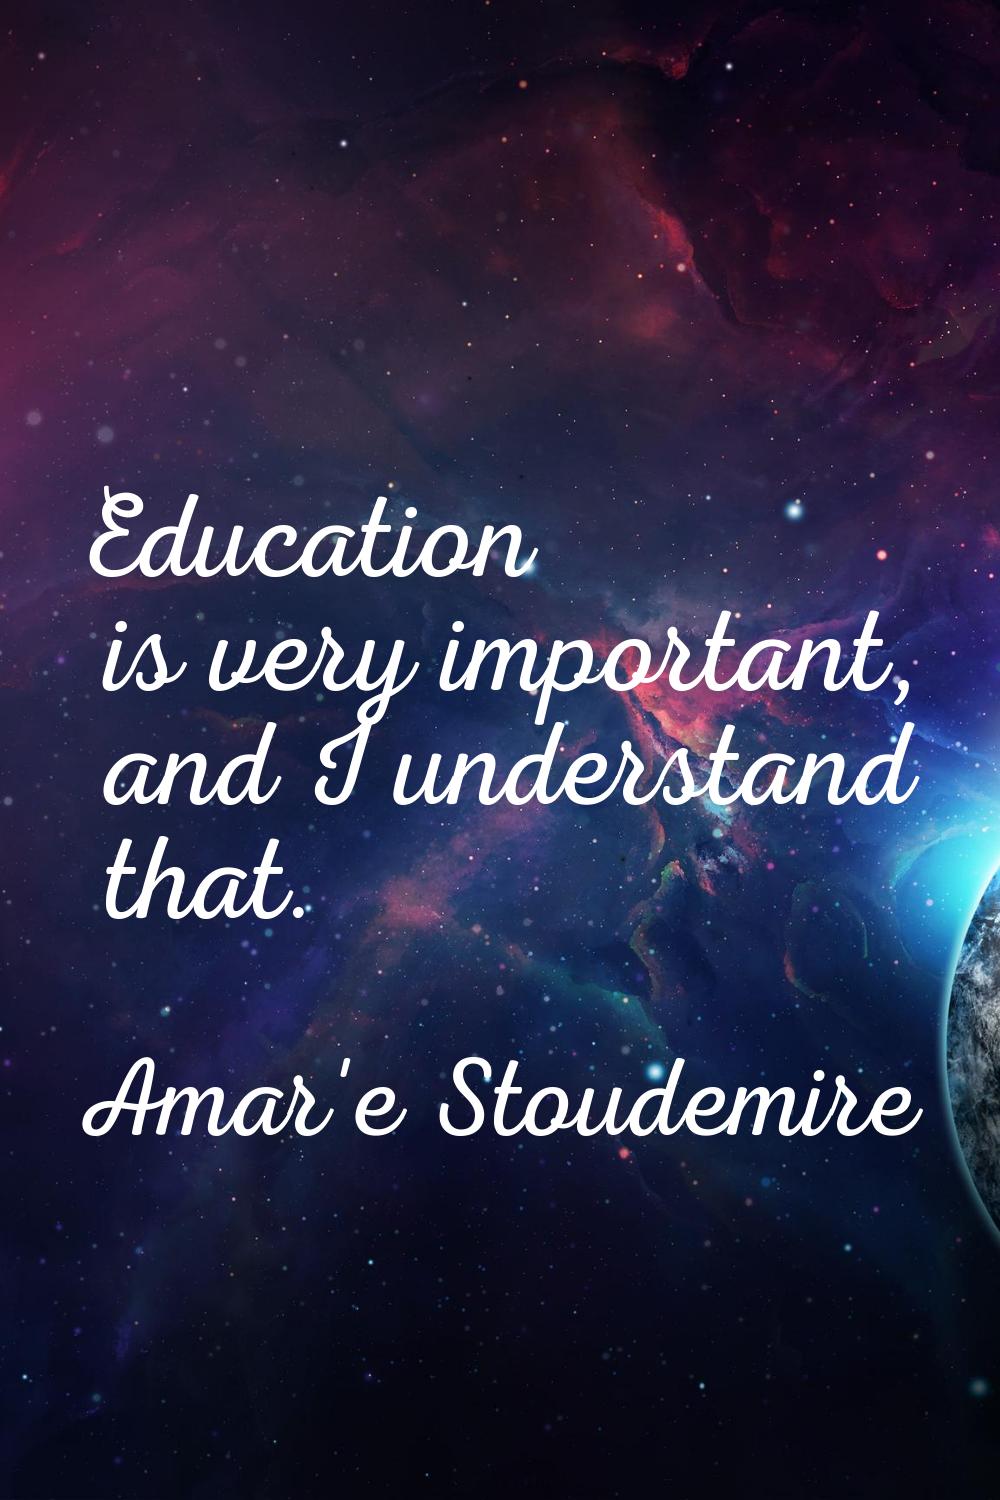 Education is very important, and I understand that.